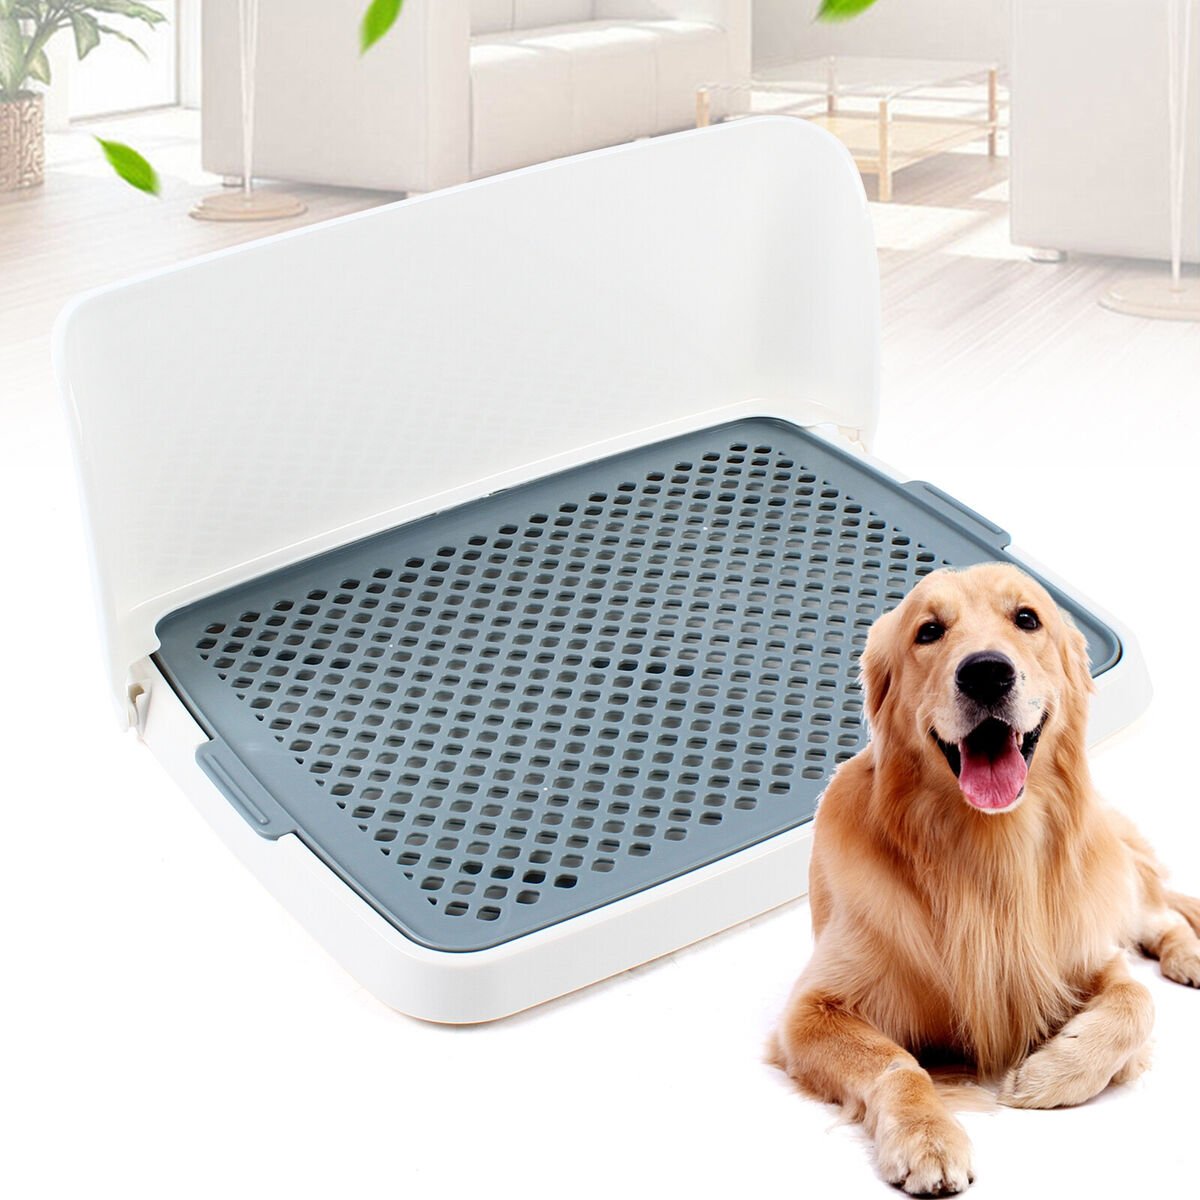 Where to Buy Dog Toilet Tray in Singapore